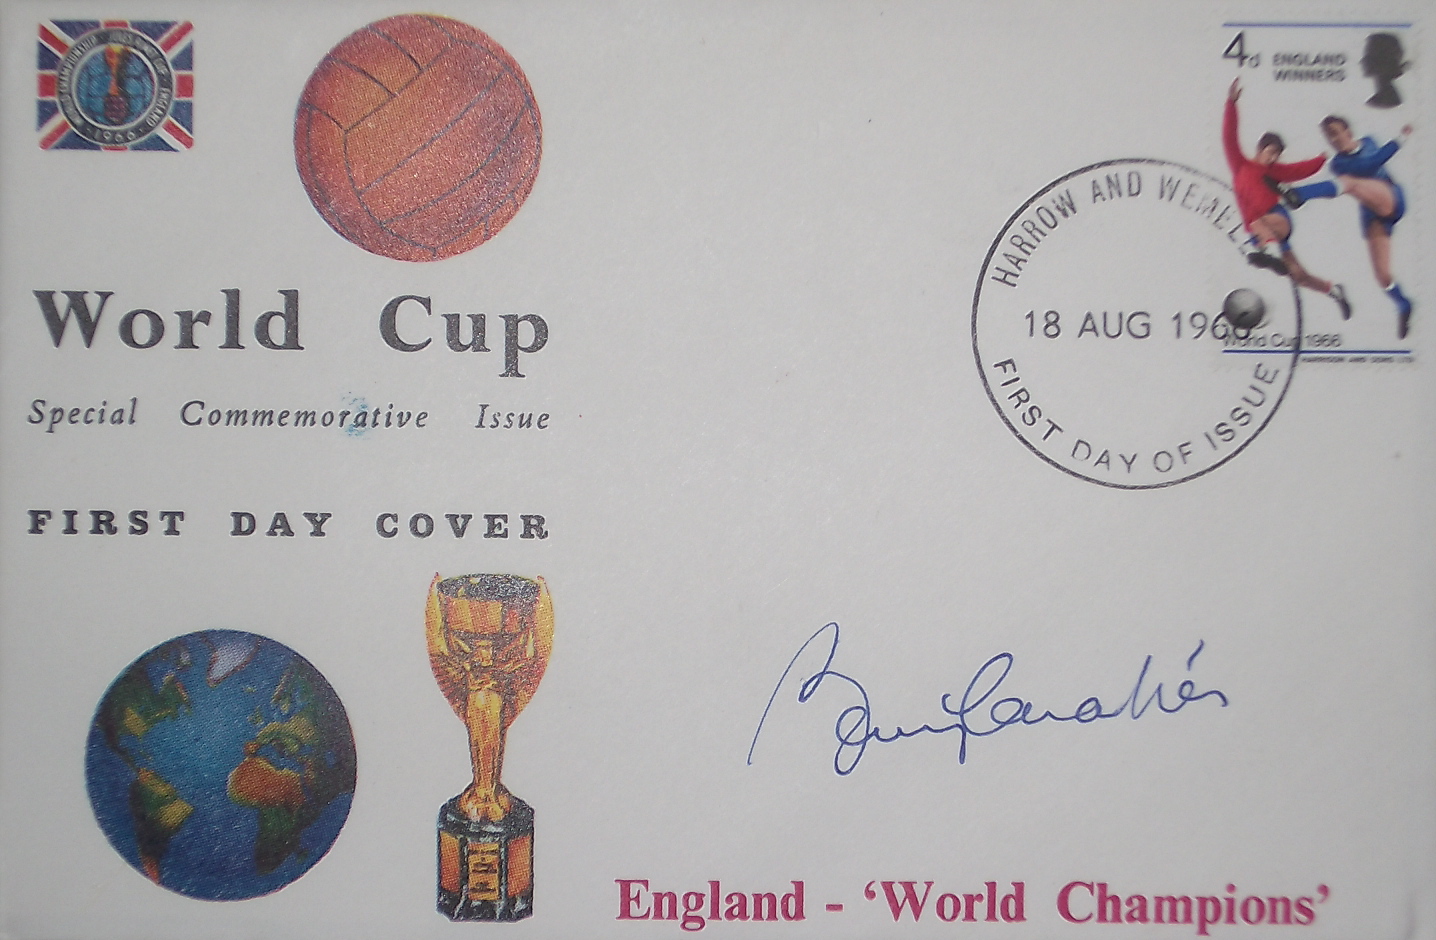 ENGLAND 1966 WORLD CUP RARE REMBRANDT POSTAL COVER AUTOGRAPHED BY BOBBY CHARLTON